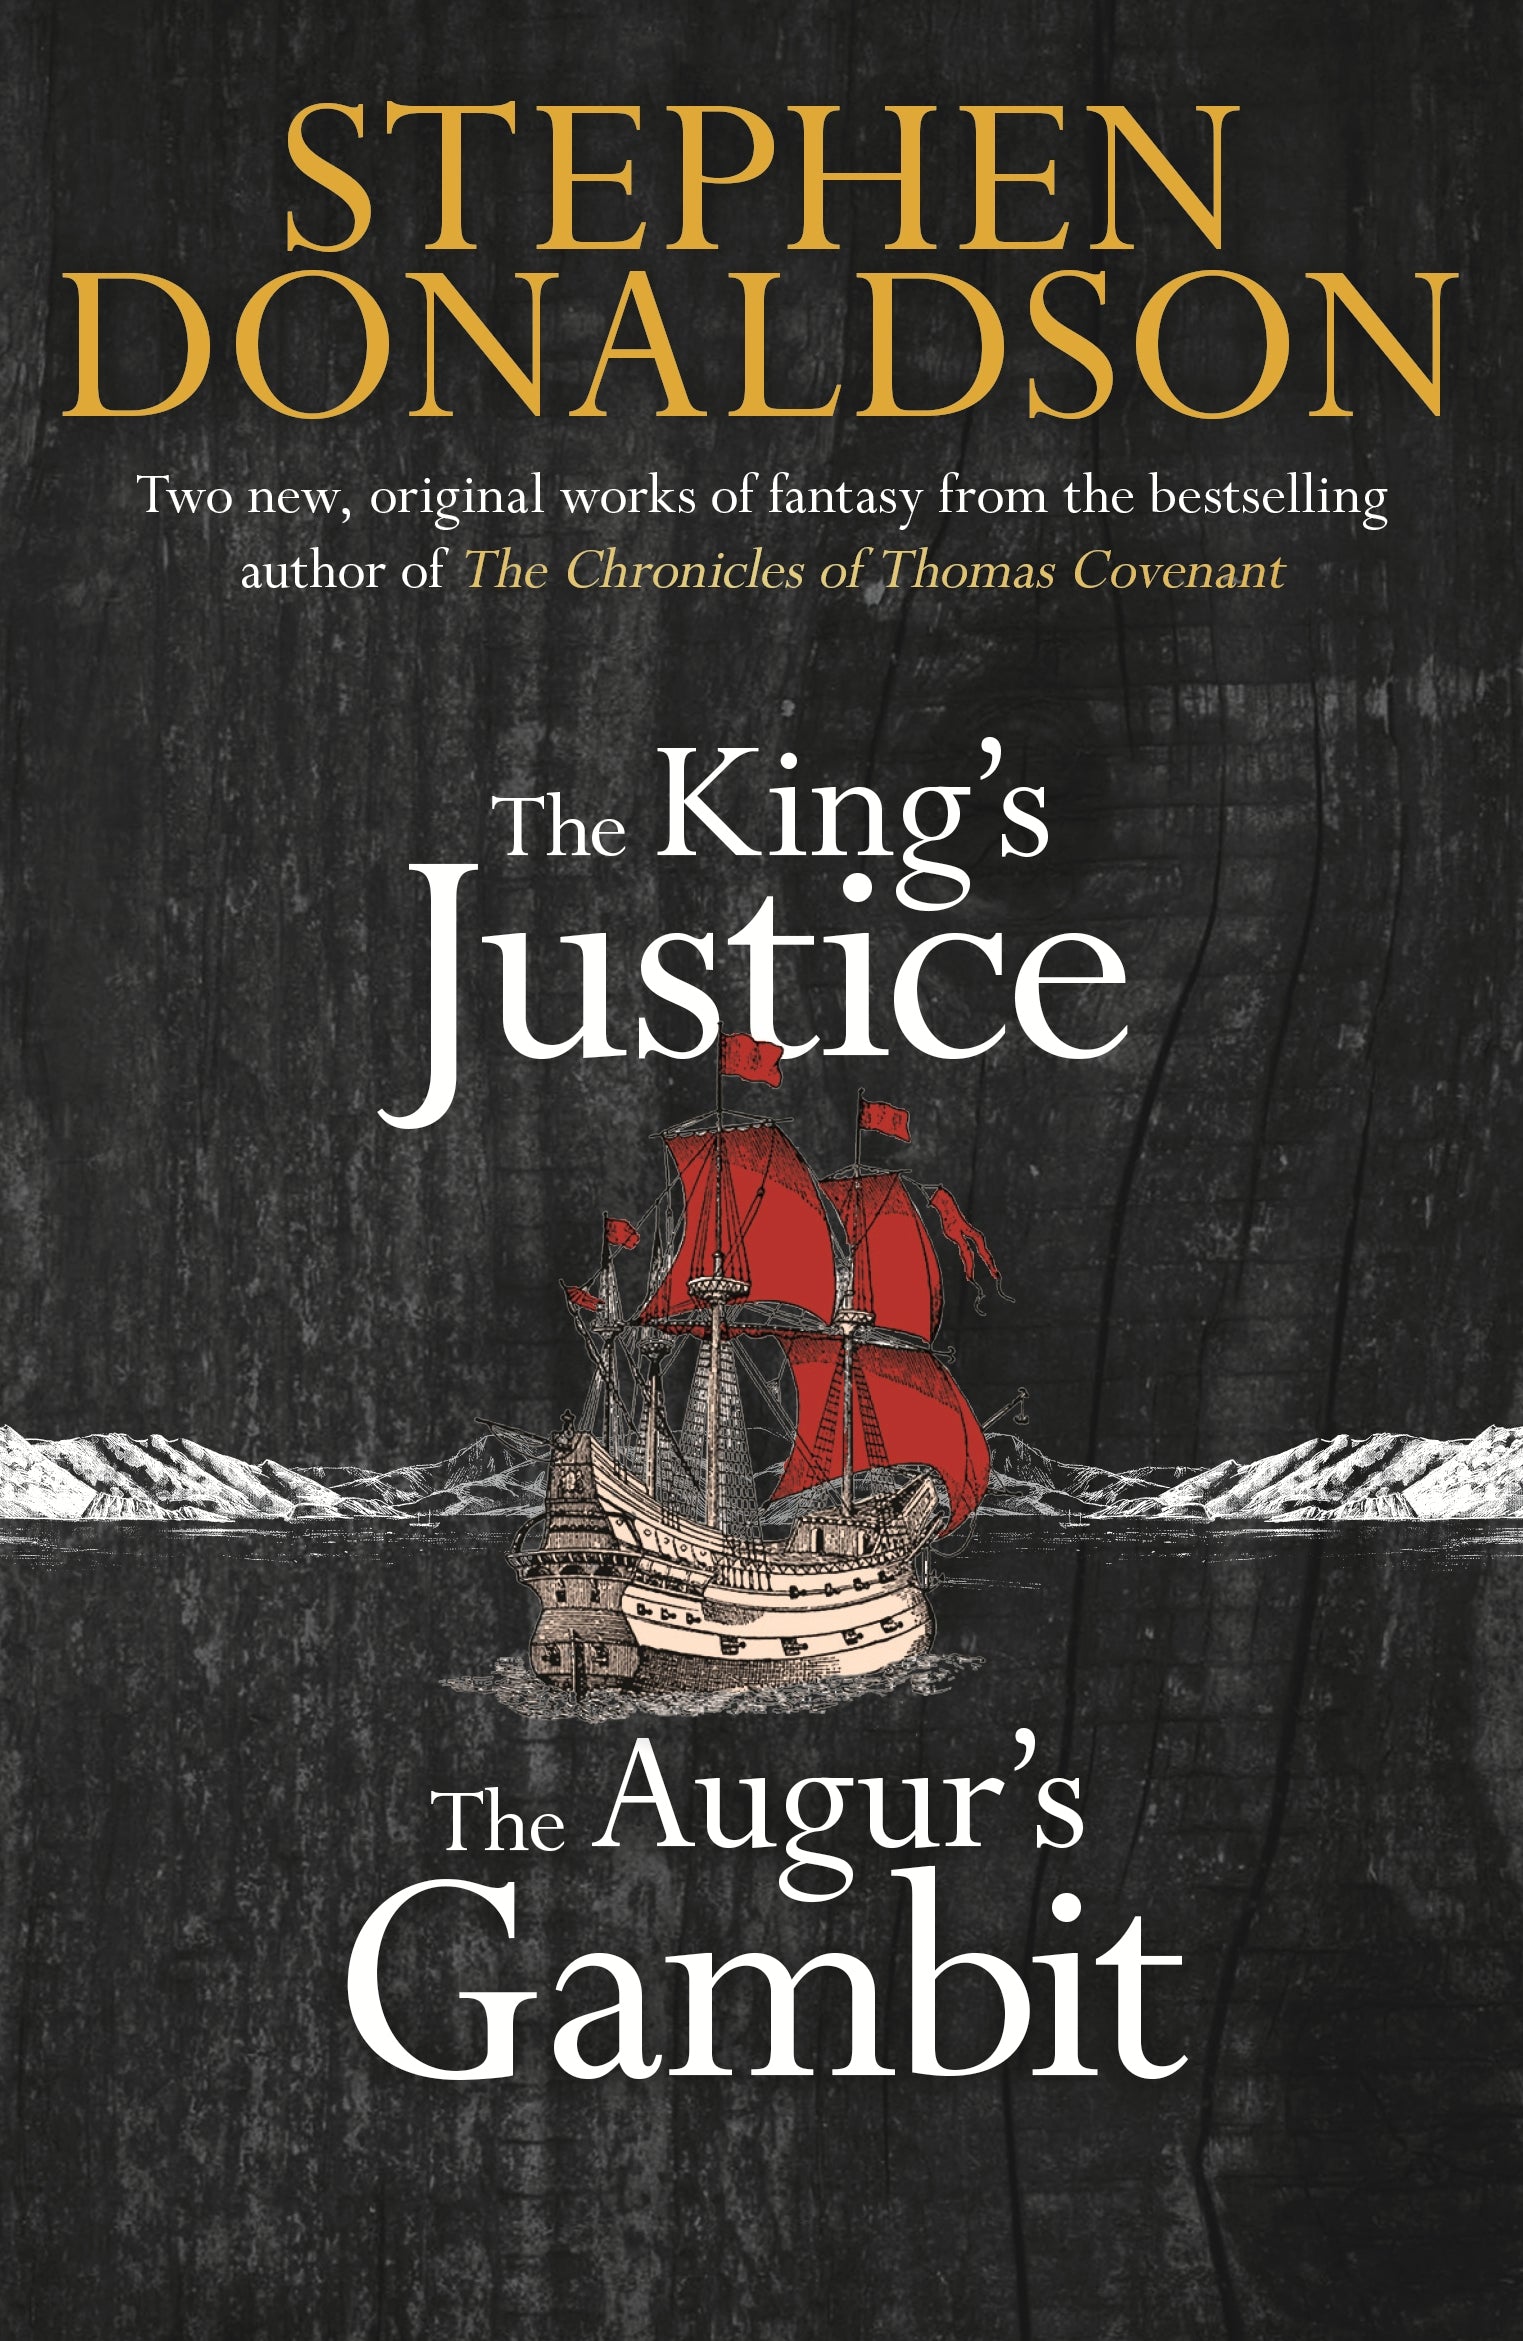 The King's Justice and The Augur's Gambit by Stephen Donaldson